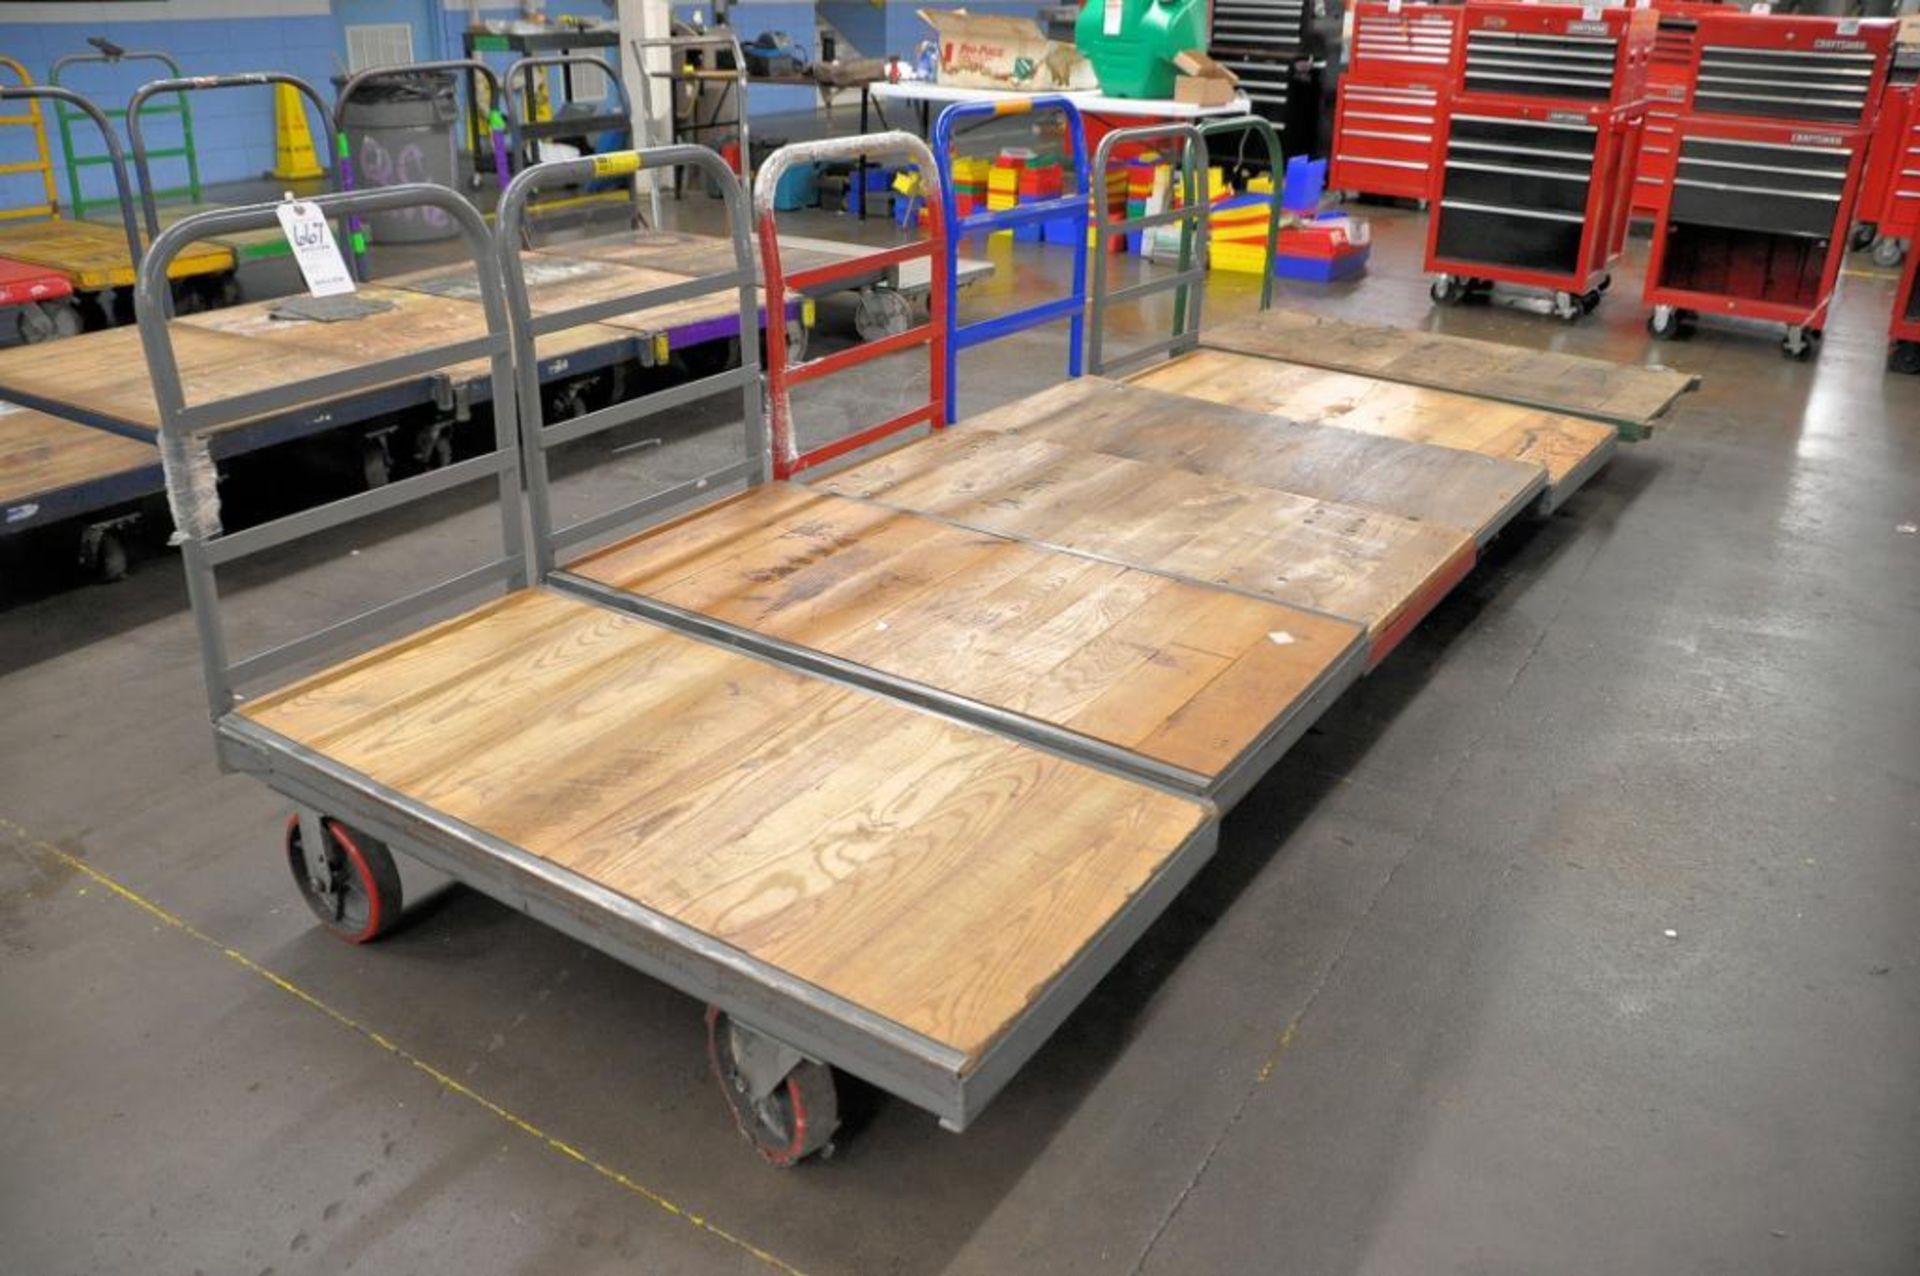 Lot - (6) 24 in. x 48 in. Flat Wood Deck Carts with Steel Frame